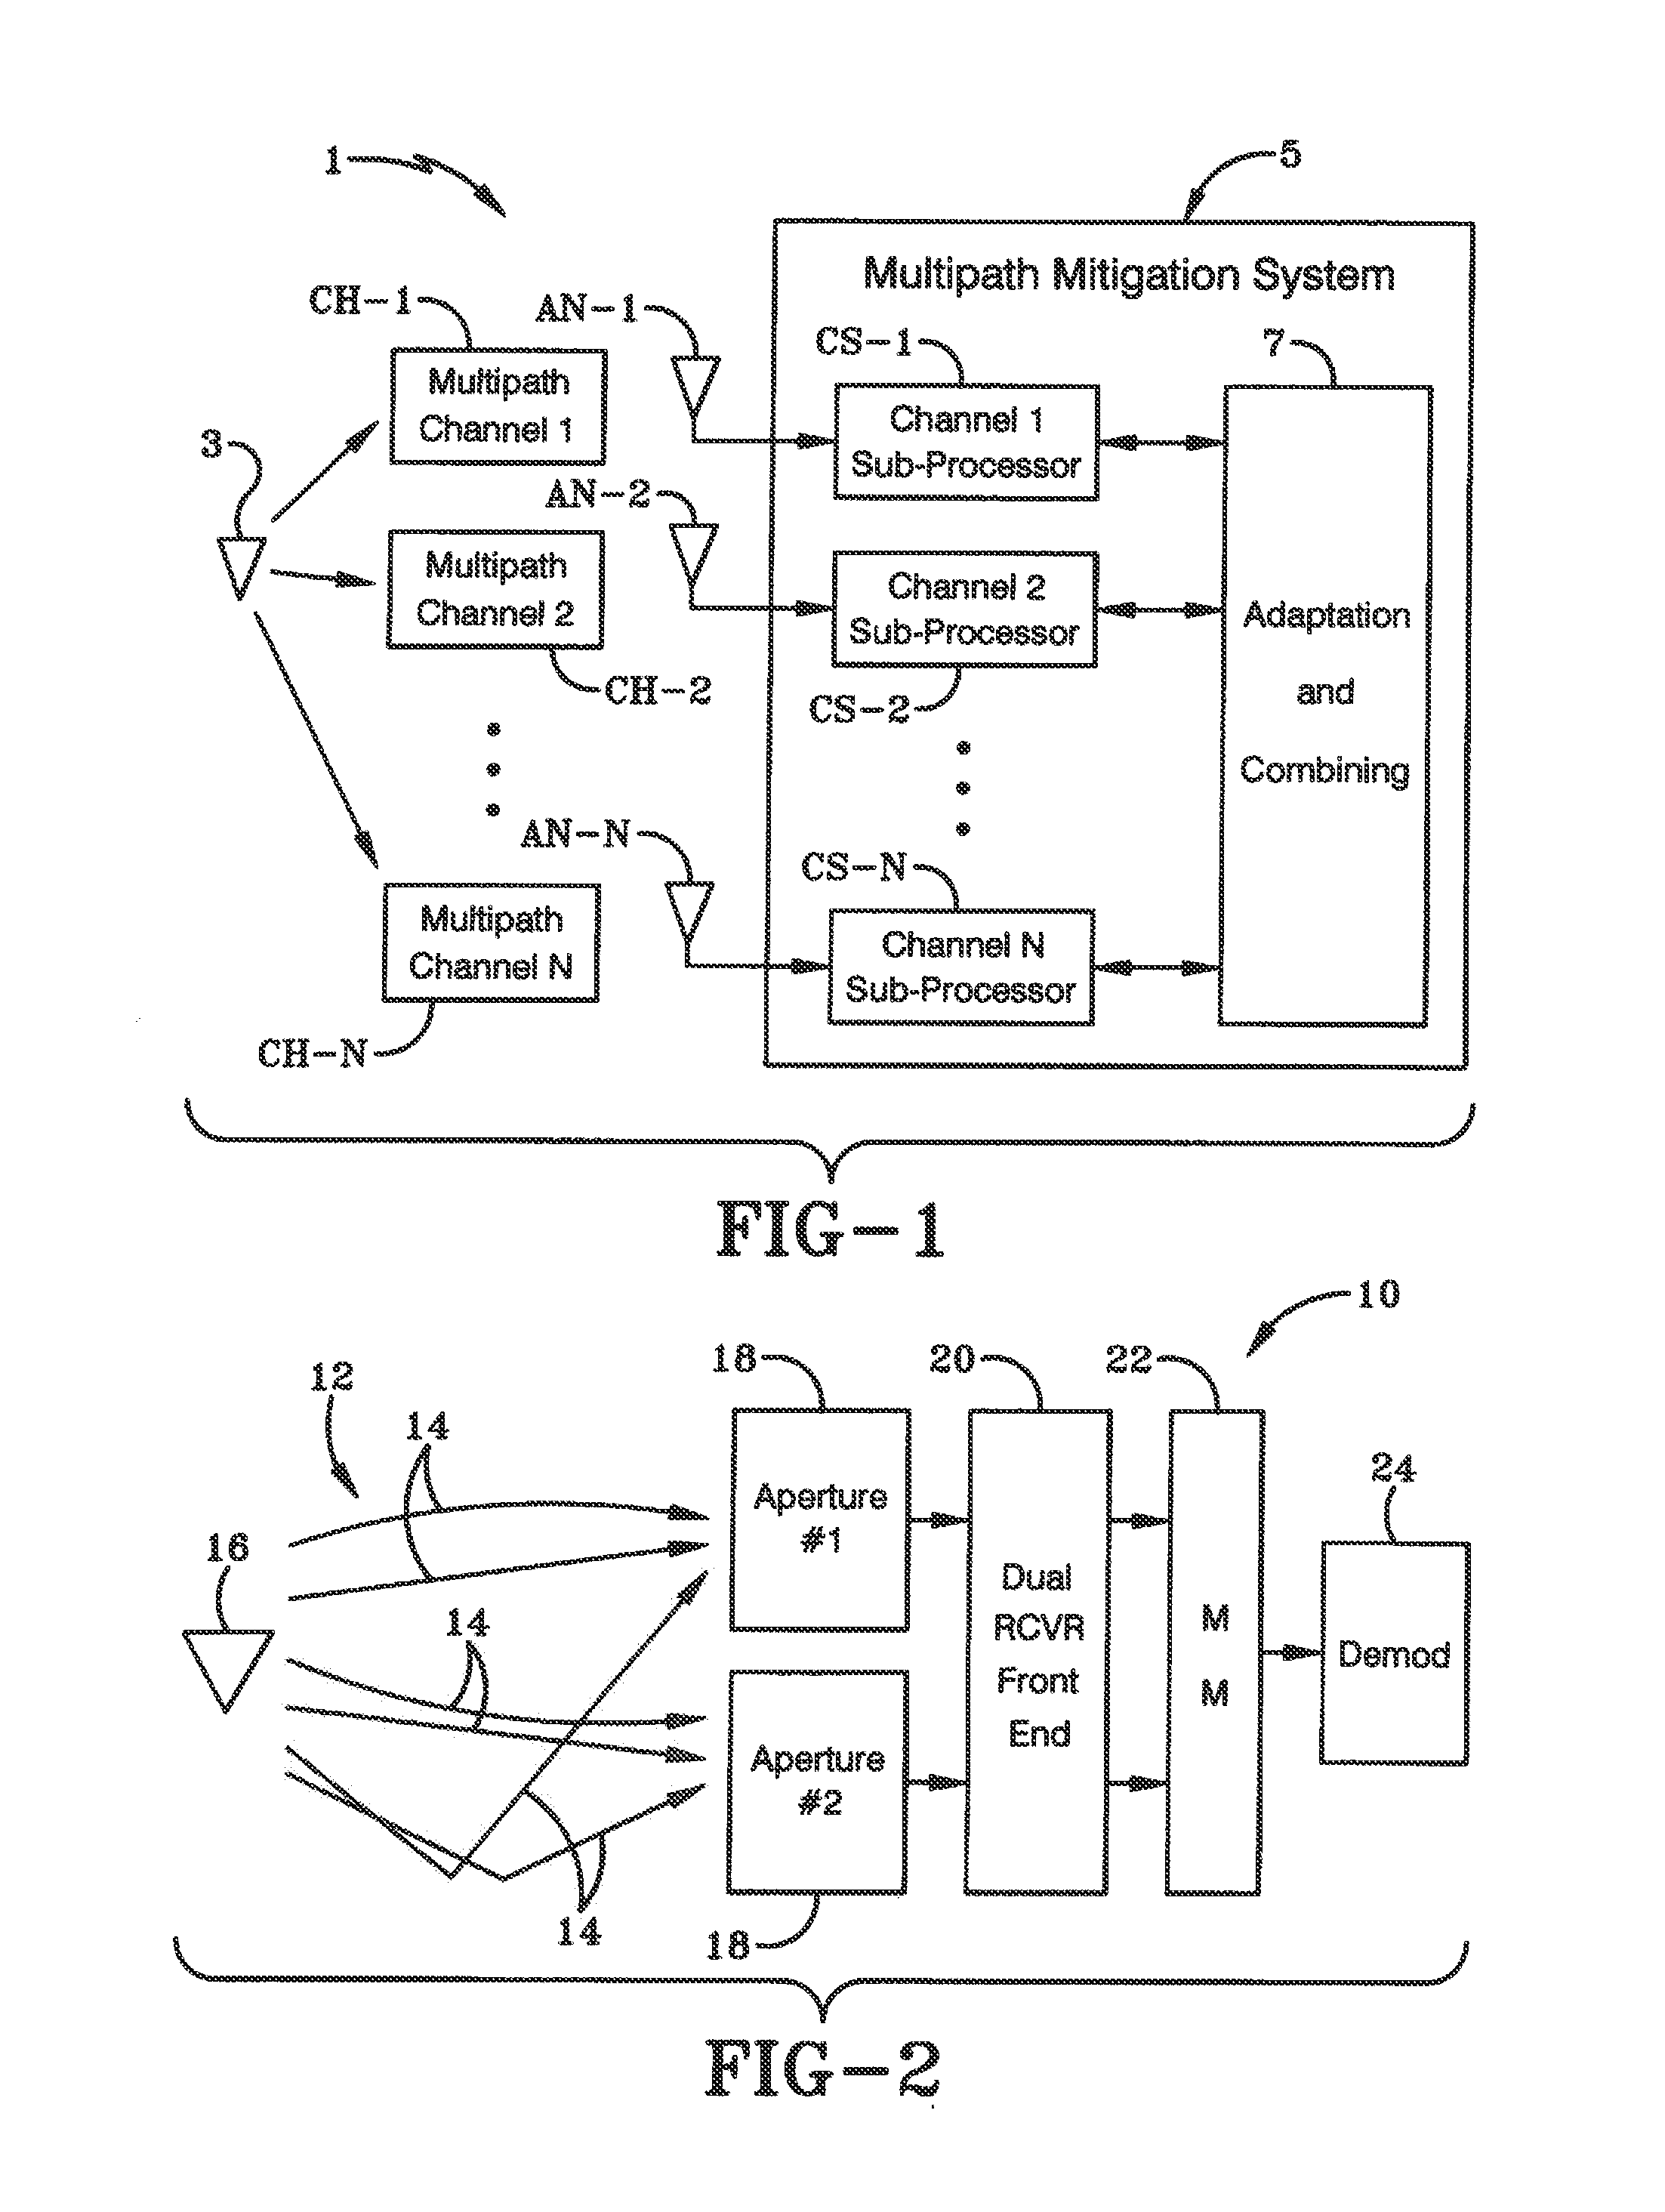 System and algorithm for multipath mitigation